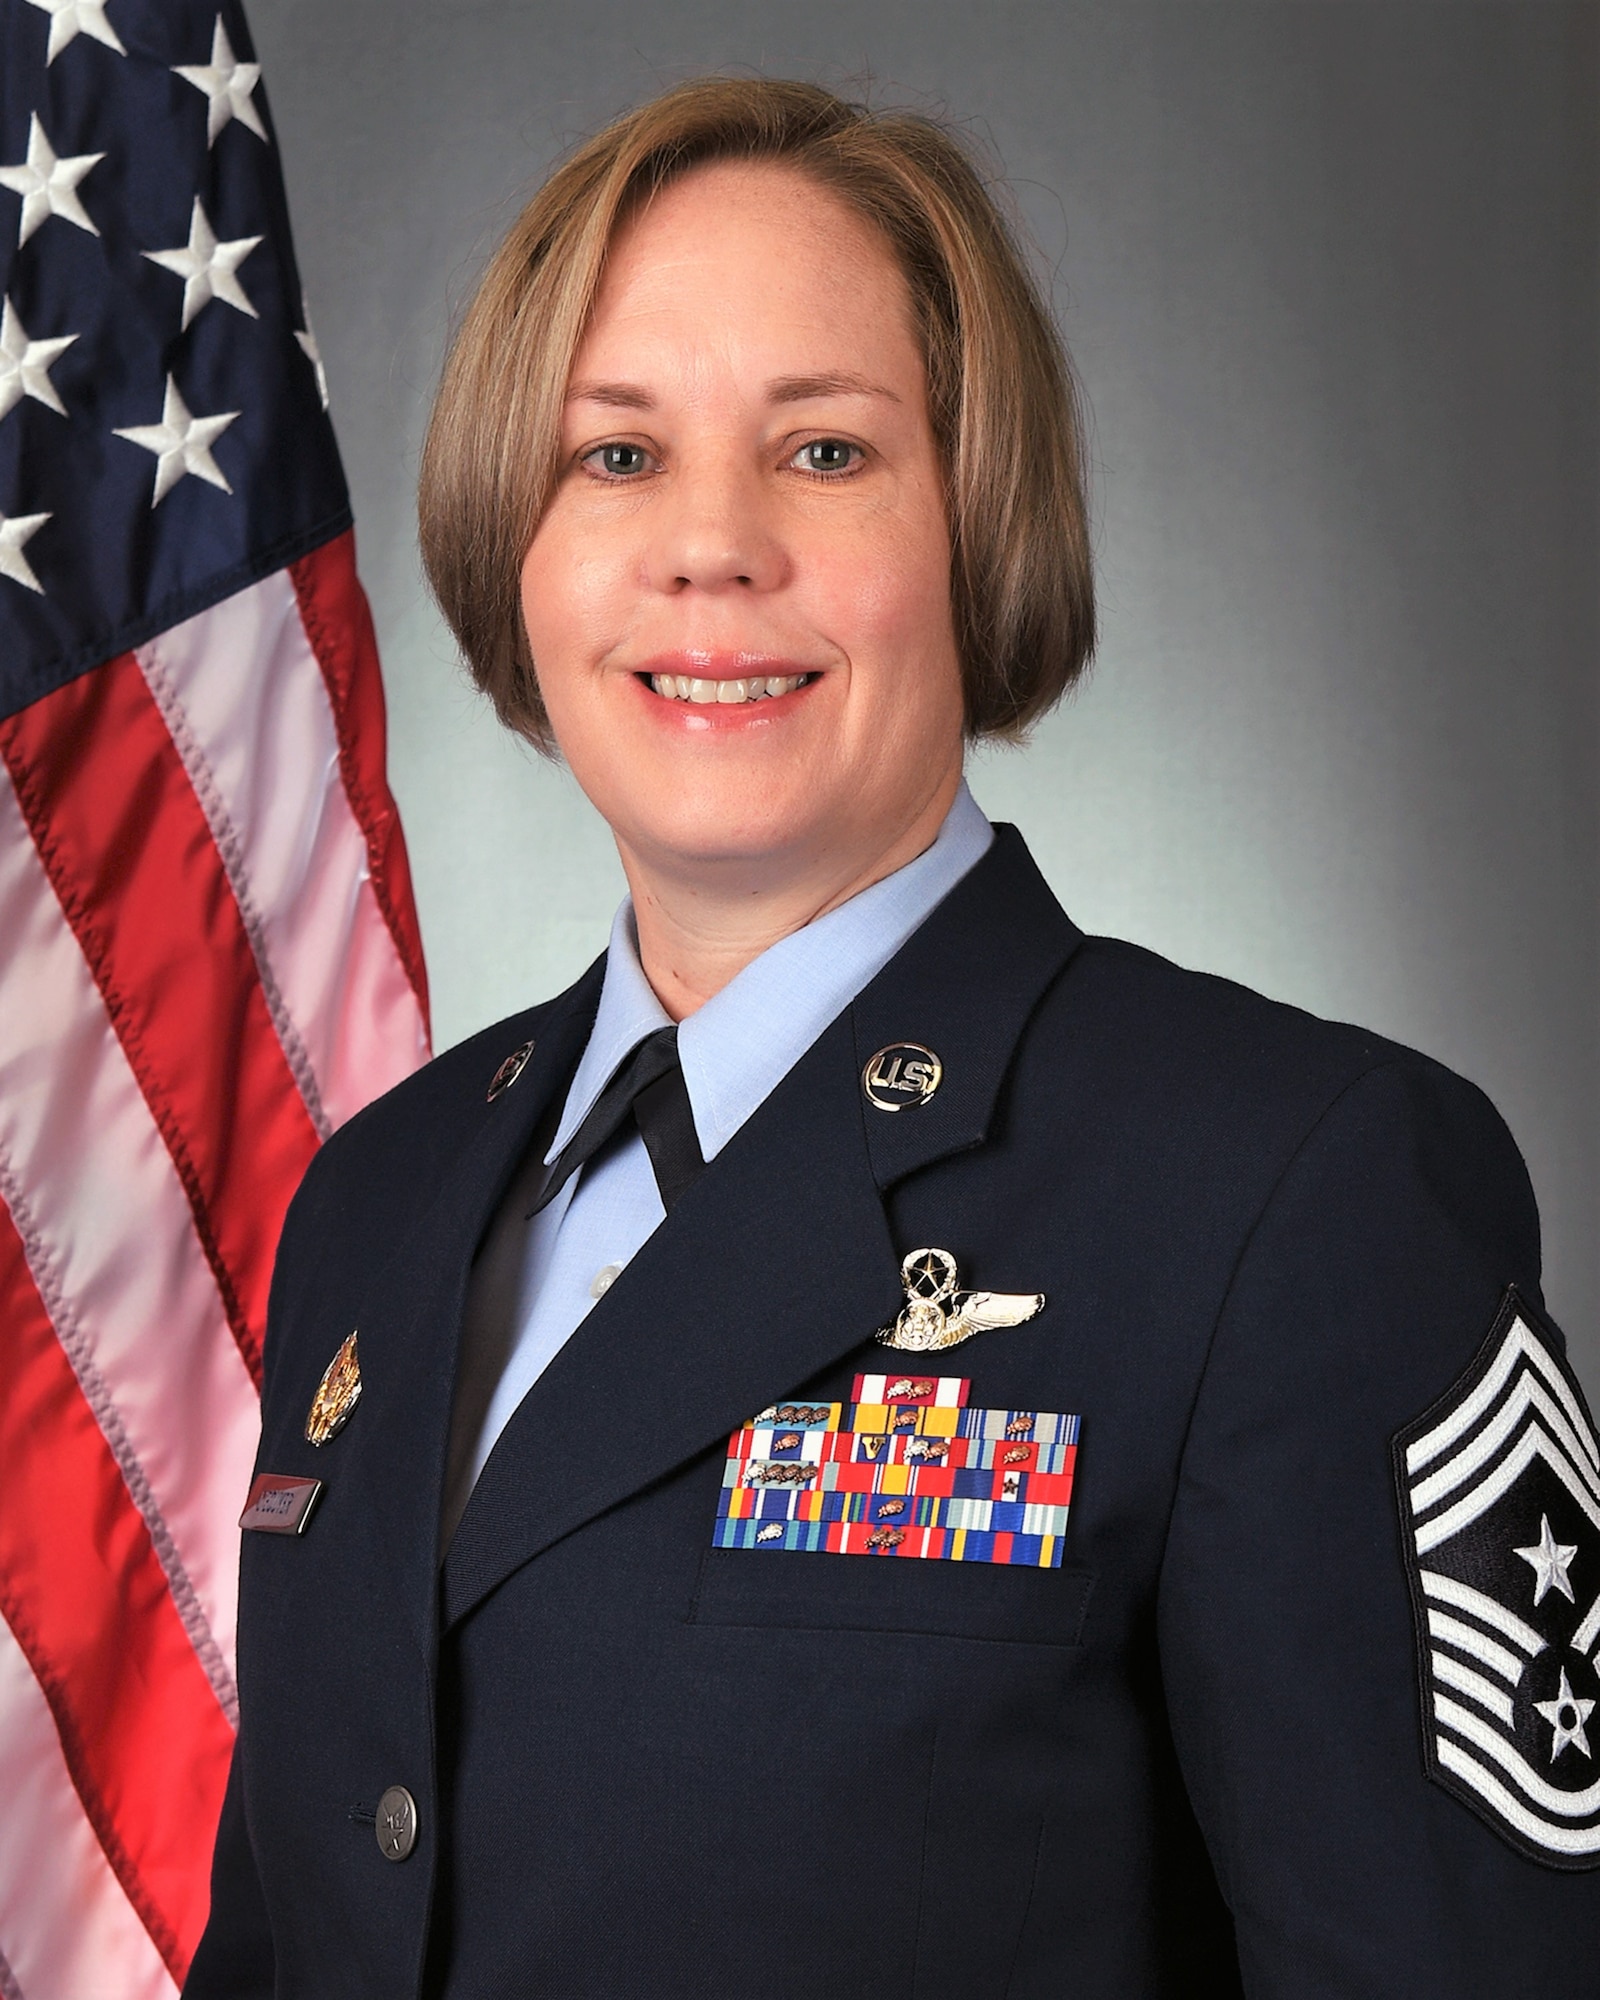 Official Air Force photo of command chief in front of U.S. flag